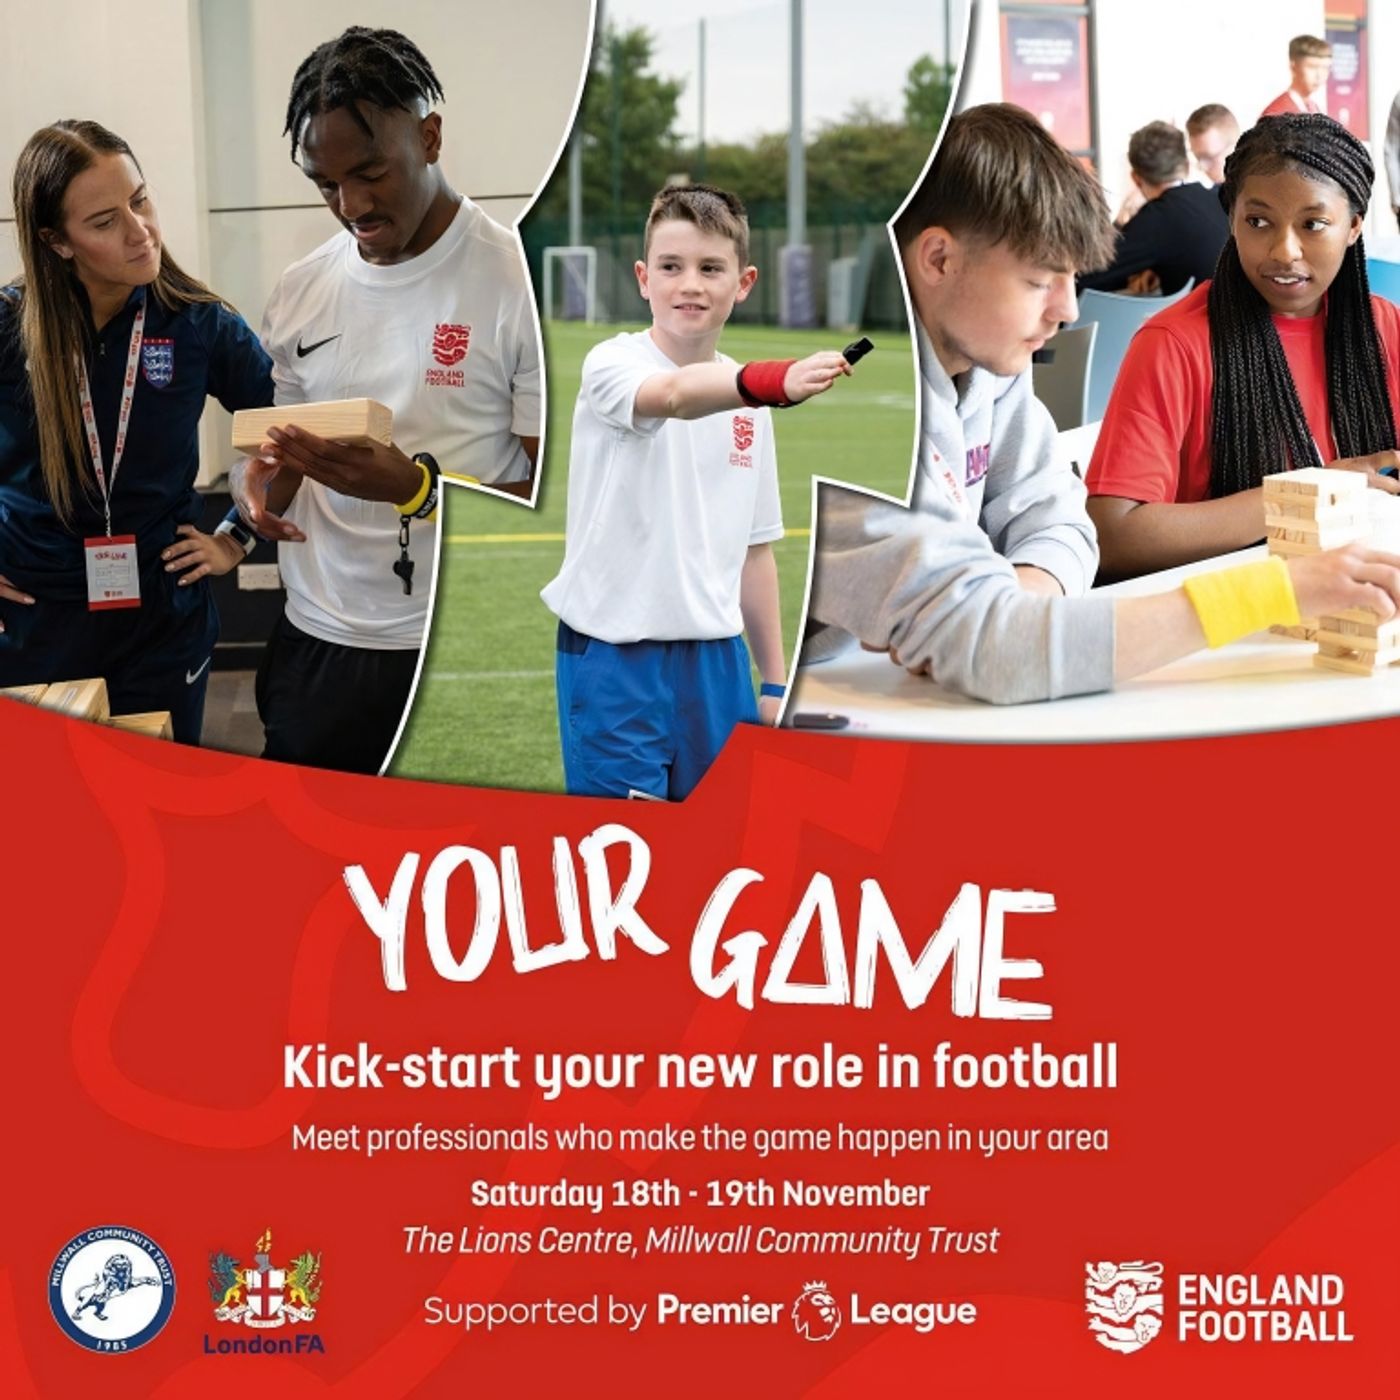 Steph Powell is interviewed on Maritime Radio about The FA YOUR GAME, a FREE two-day event on the 18th and 19th November at the Lions Centre